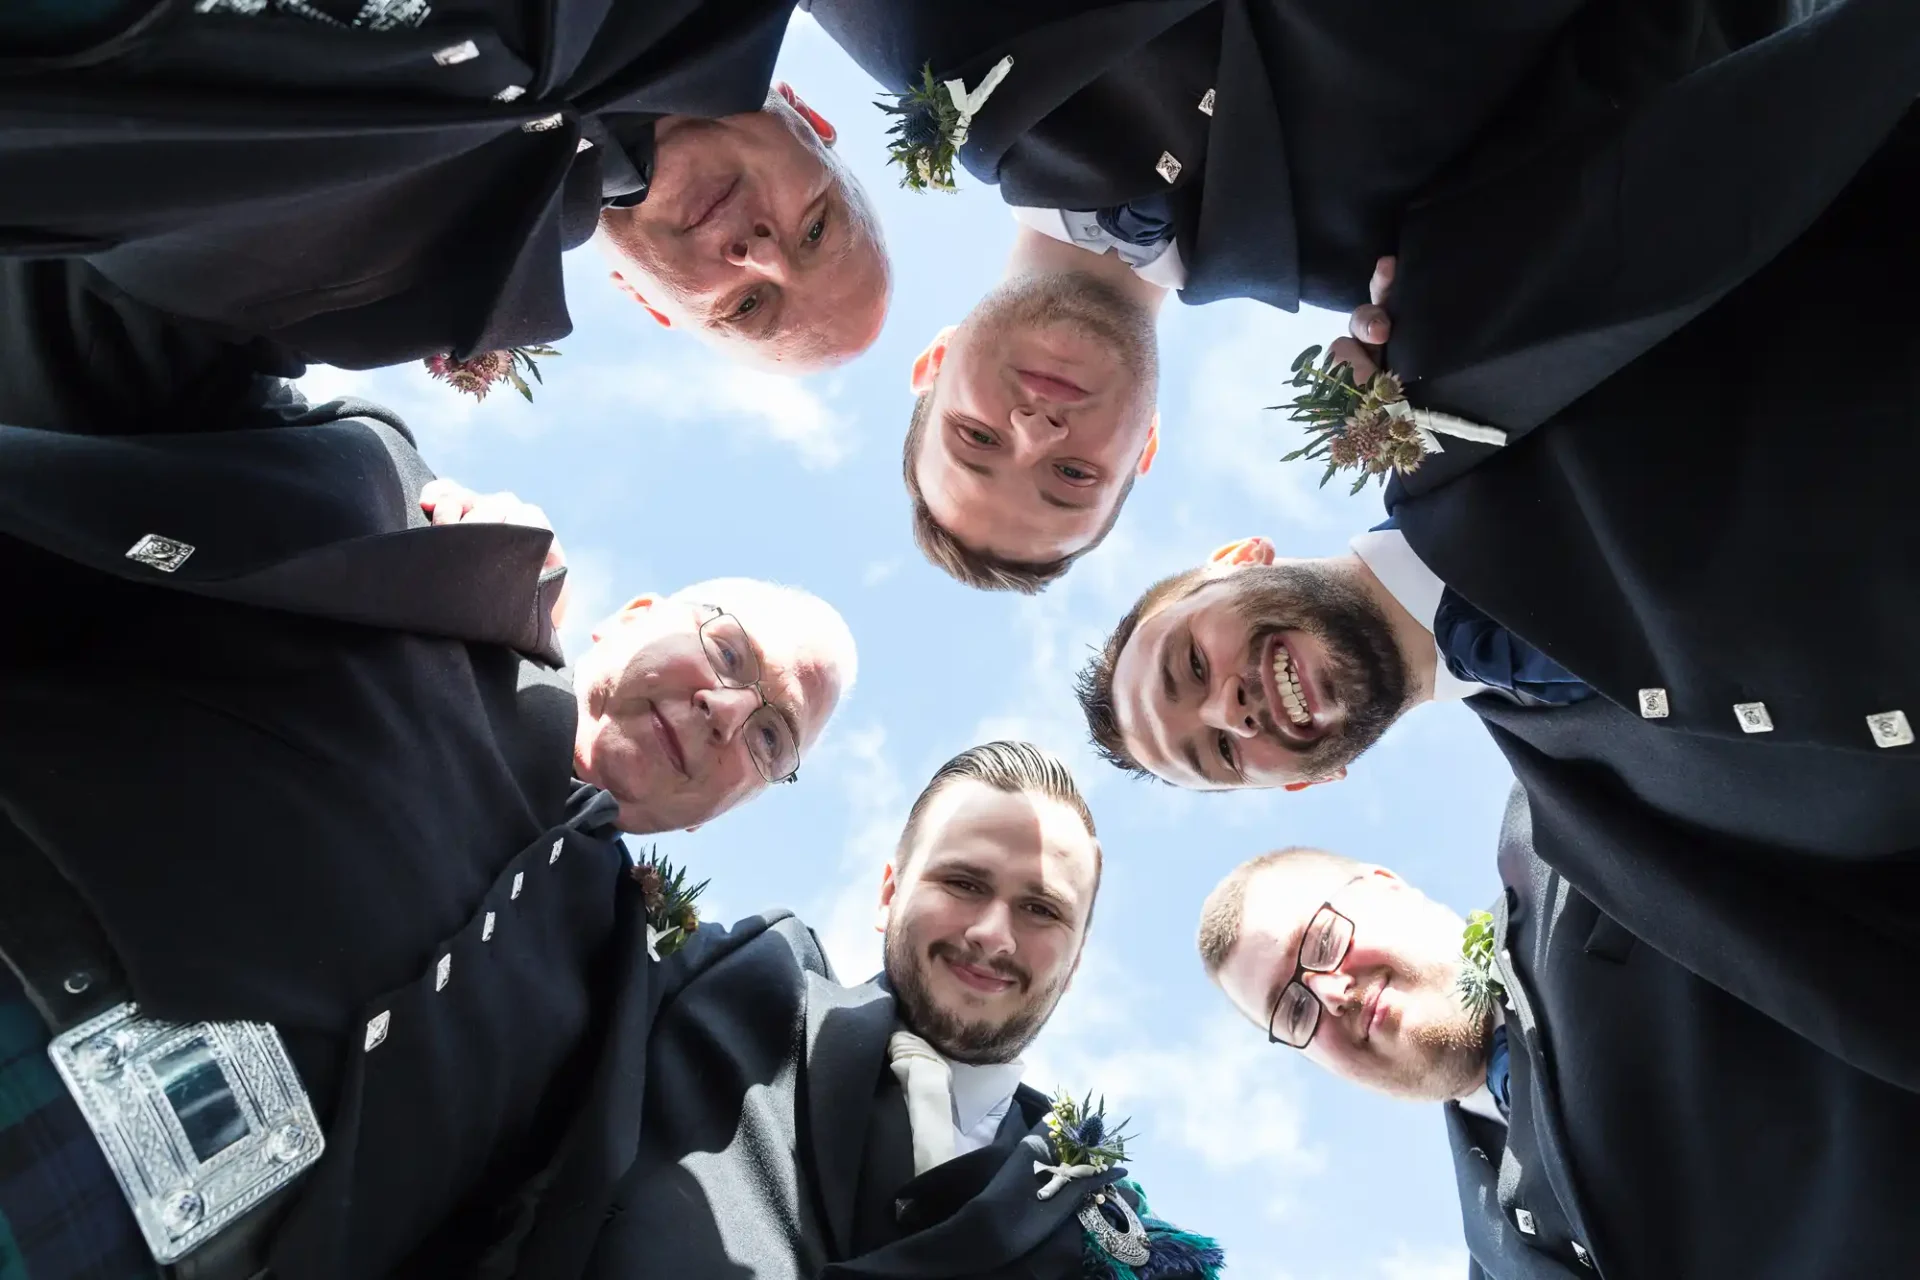 Six men in formal attire with boutonnieres seen from a low-angle, forming a circle with their heads leaning in, against a blue sky with clouds.